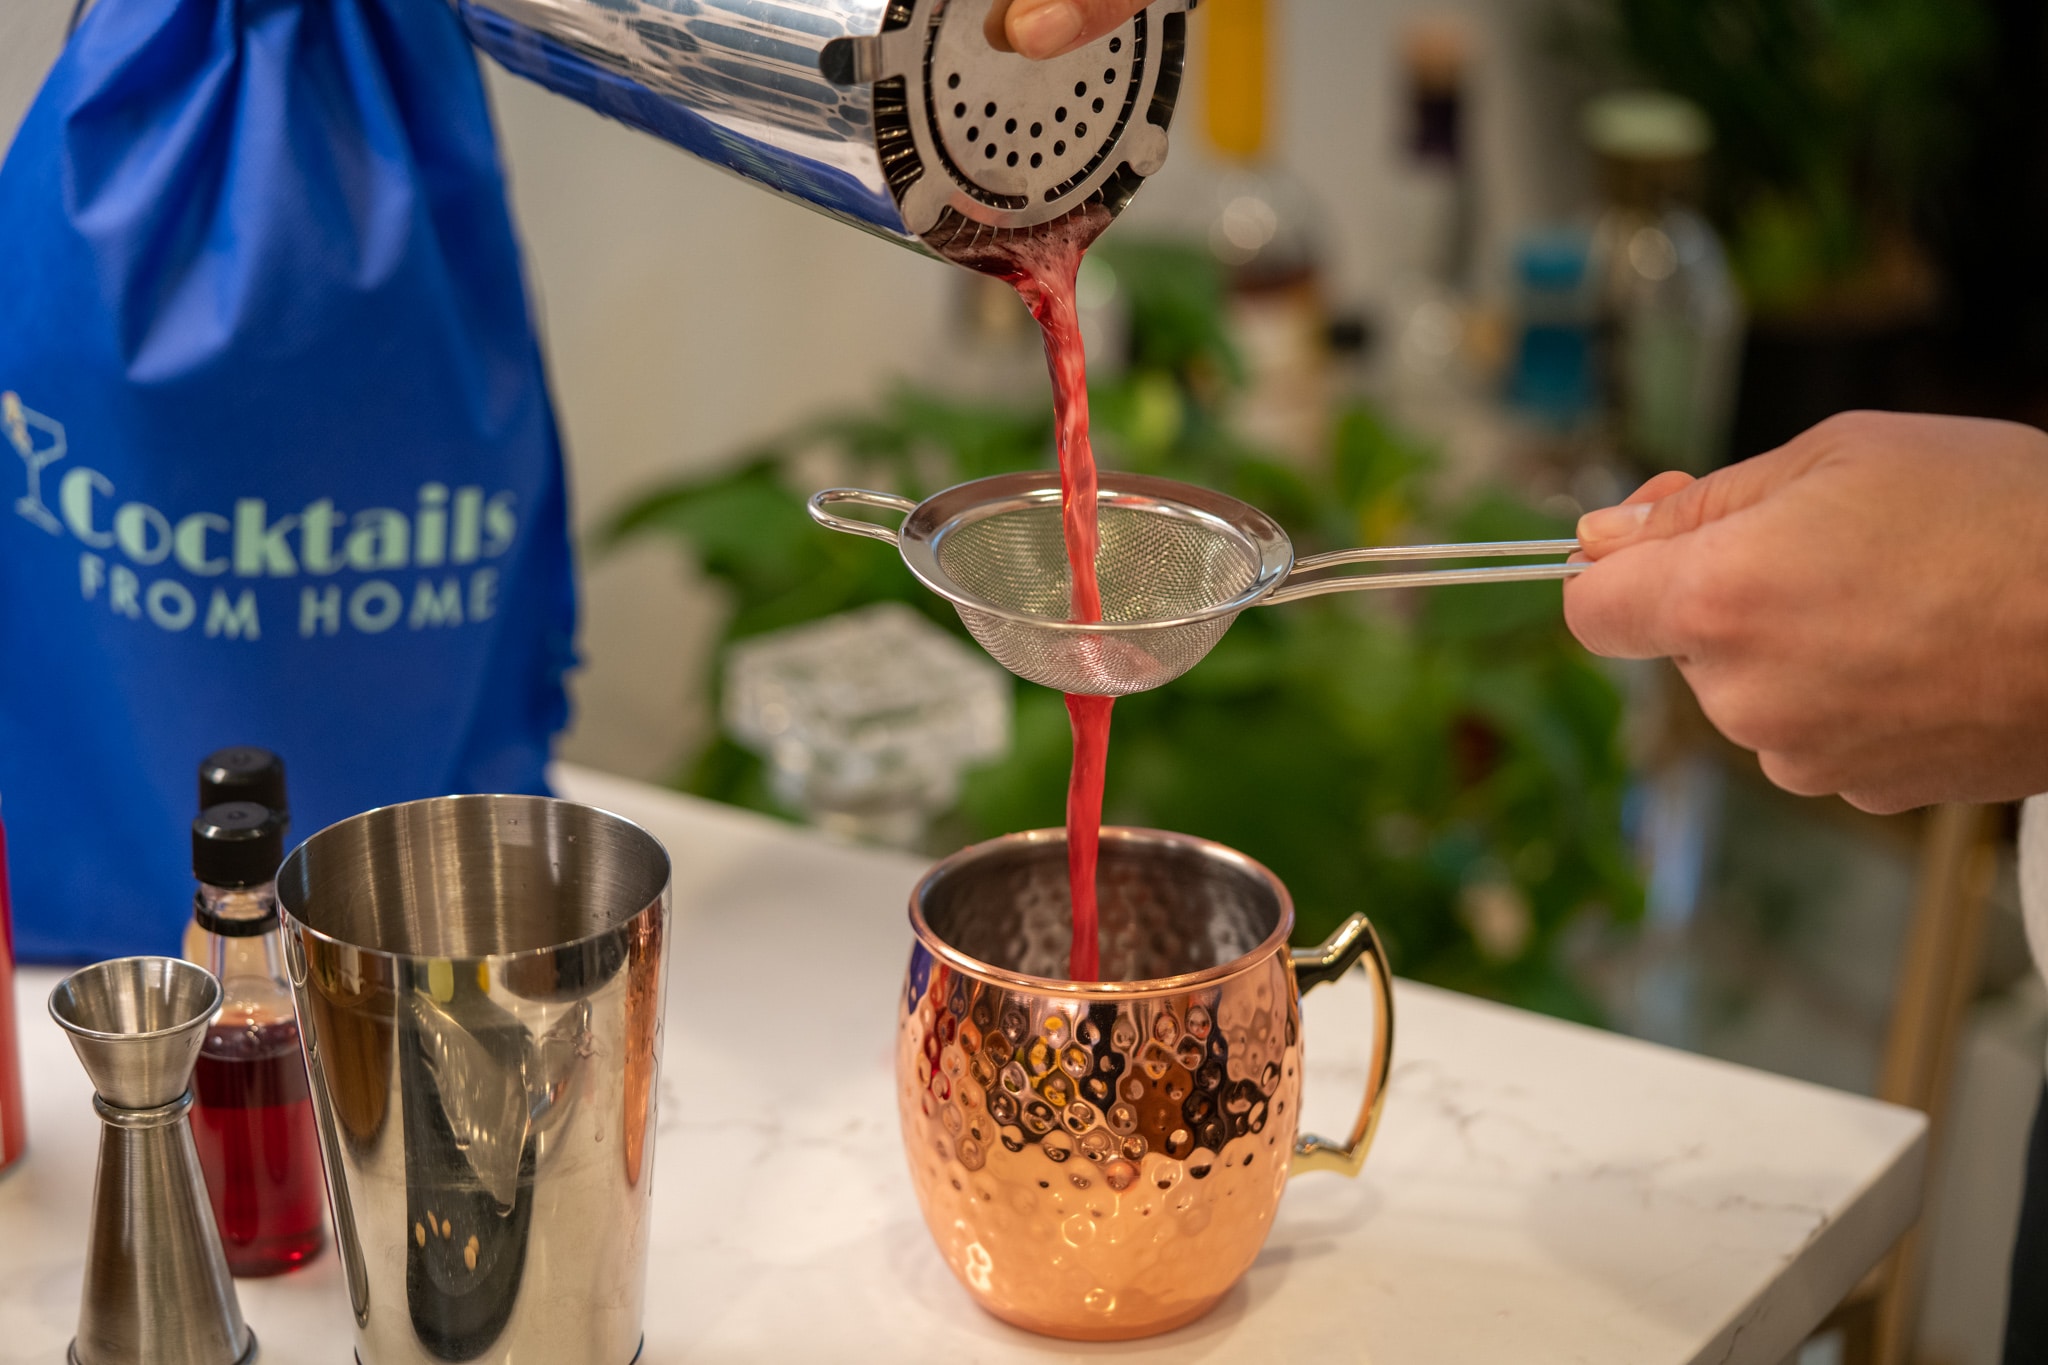 The contents of a cocktail shaker are poured through a mesh strainer into a copper Moscow Mule mug.